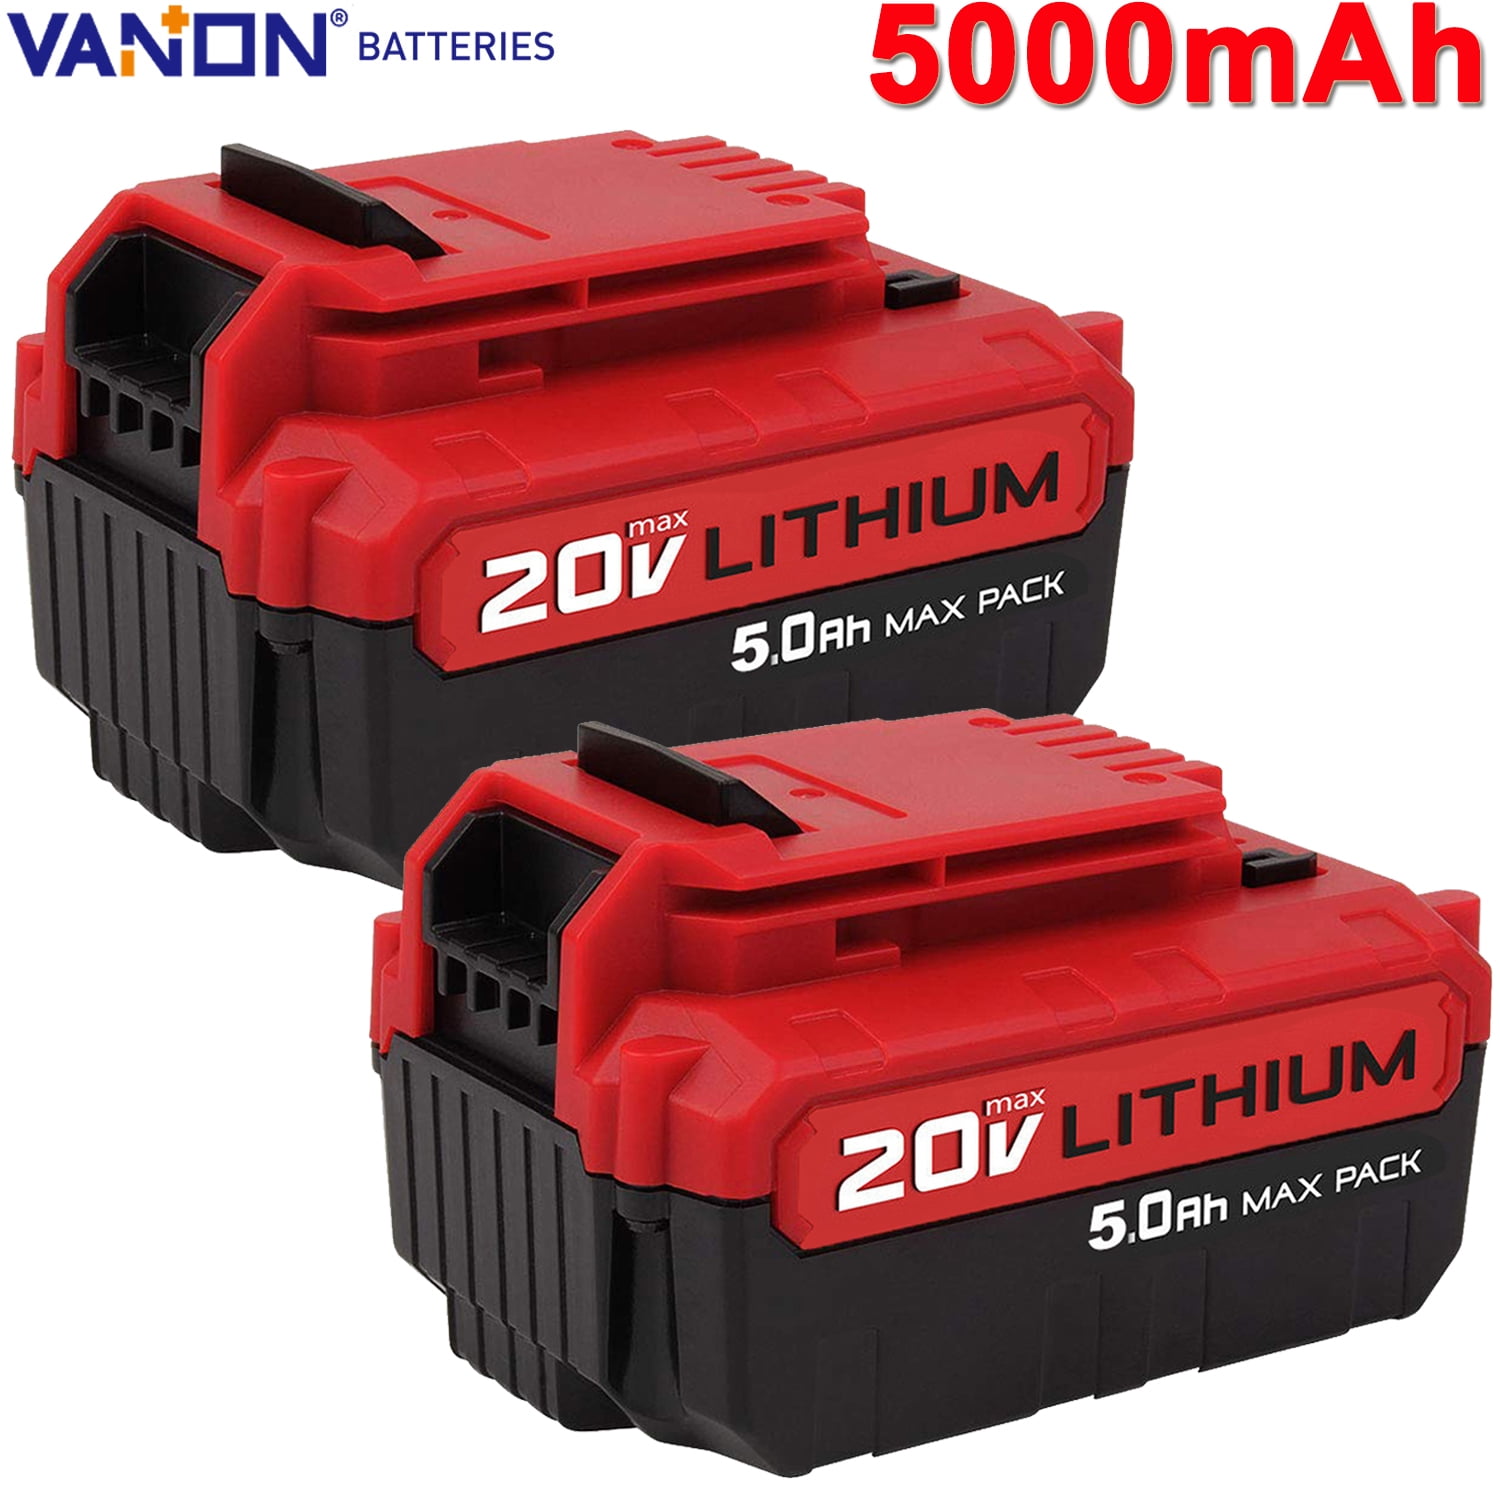 2X 5.0Ah Lithium-ion Battery For PORTER CABLE PCC685L 20V MAX PCC680L Drill Tool